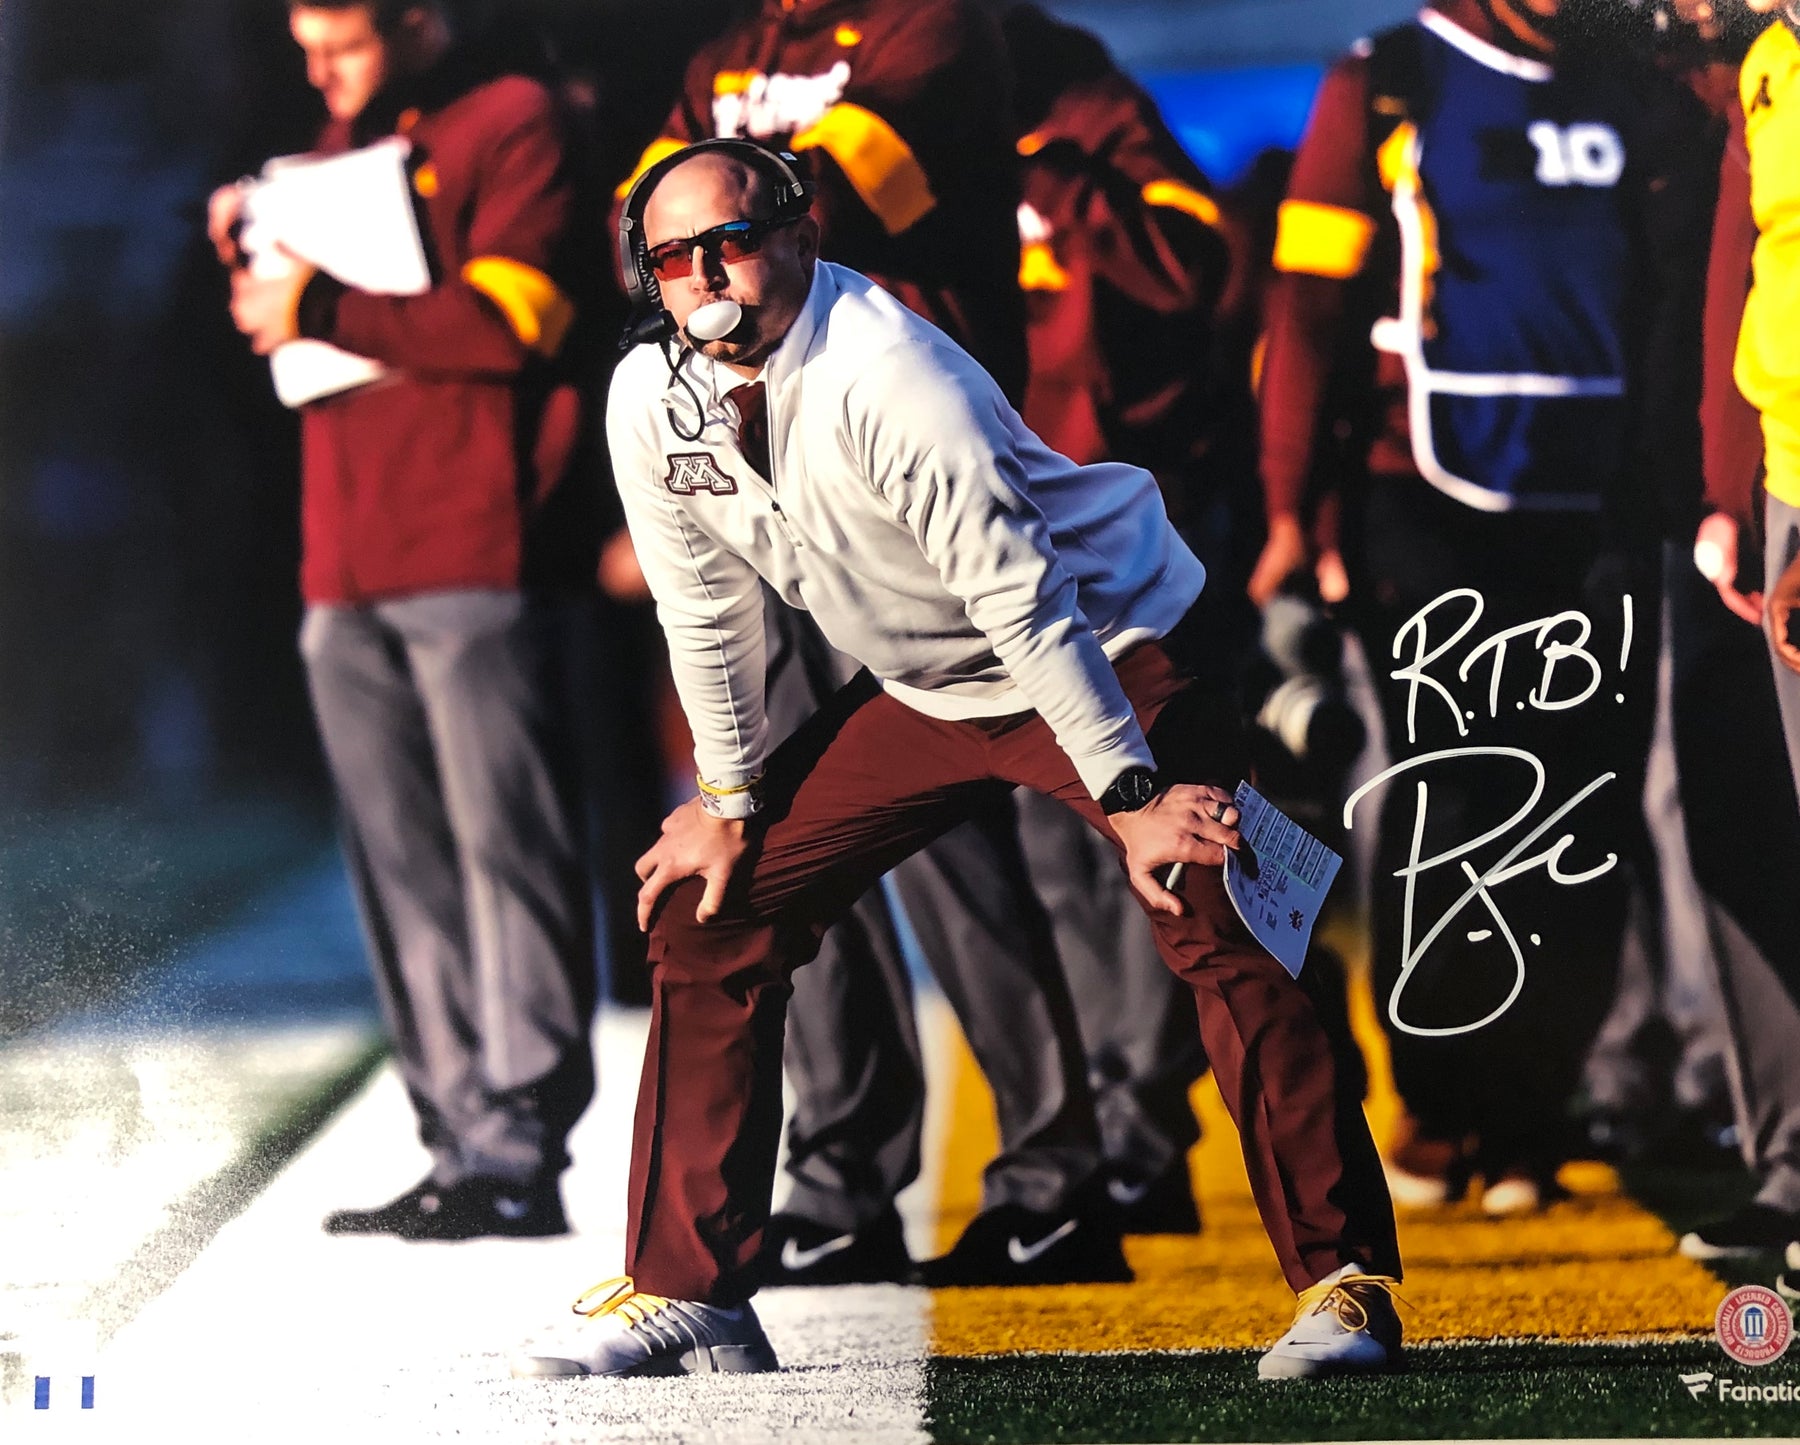 PJ Fleck Signed Sidelines 16x20 Photo with RTB